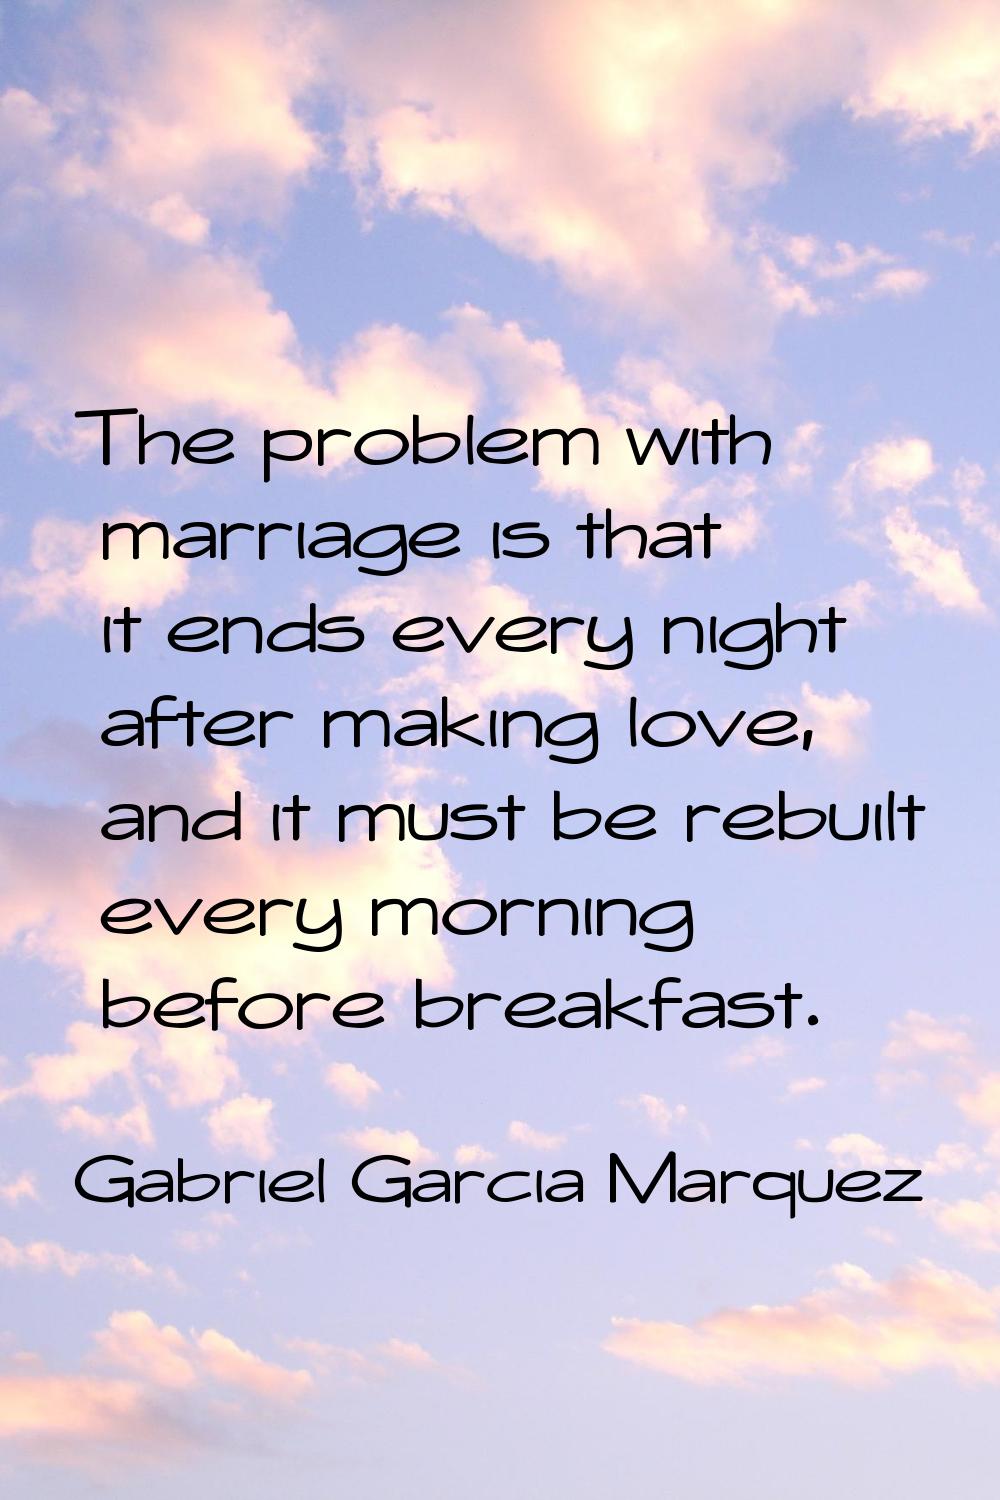 The problem with marriage is that it ends every night after making love, and it must be rebuilt eve